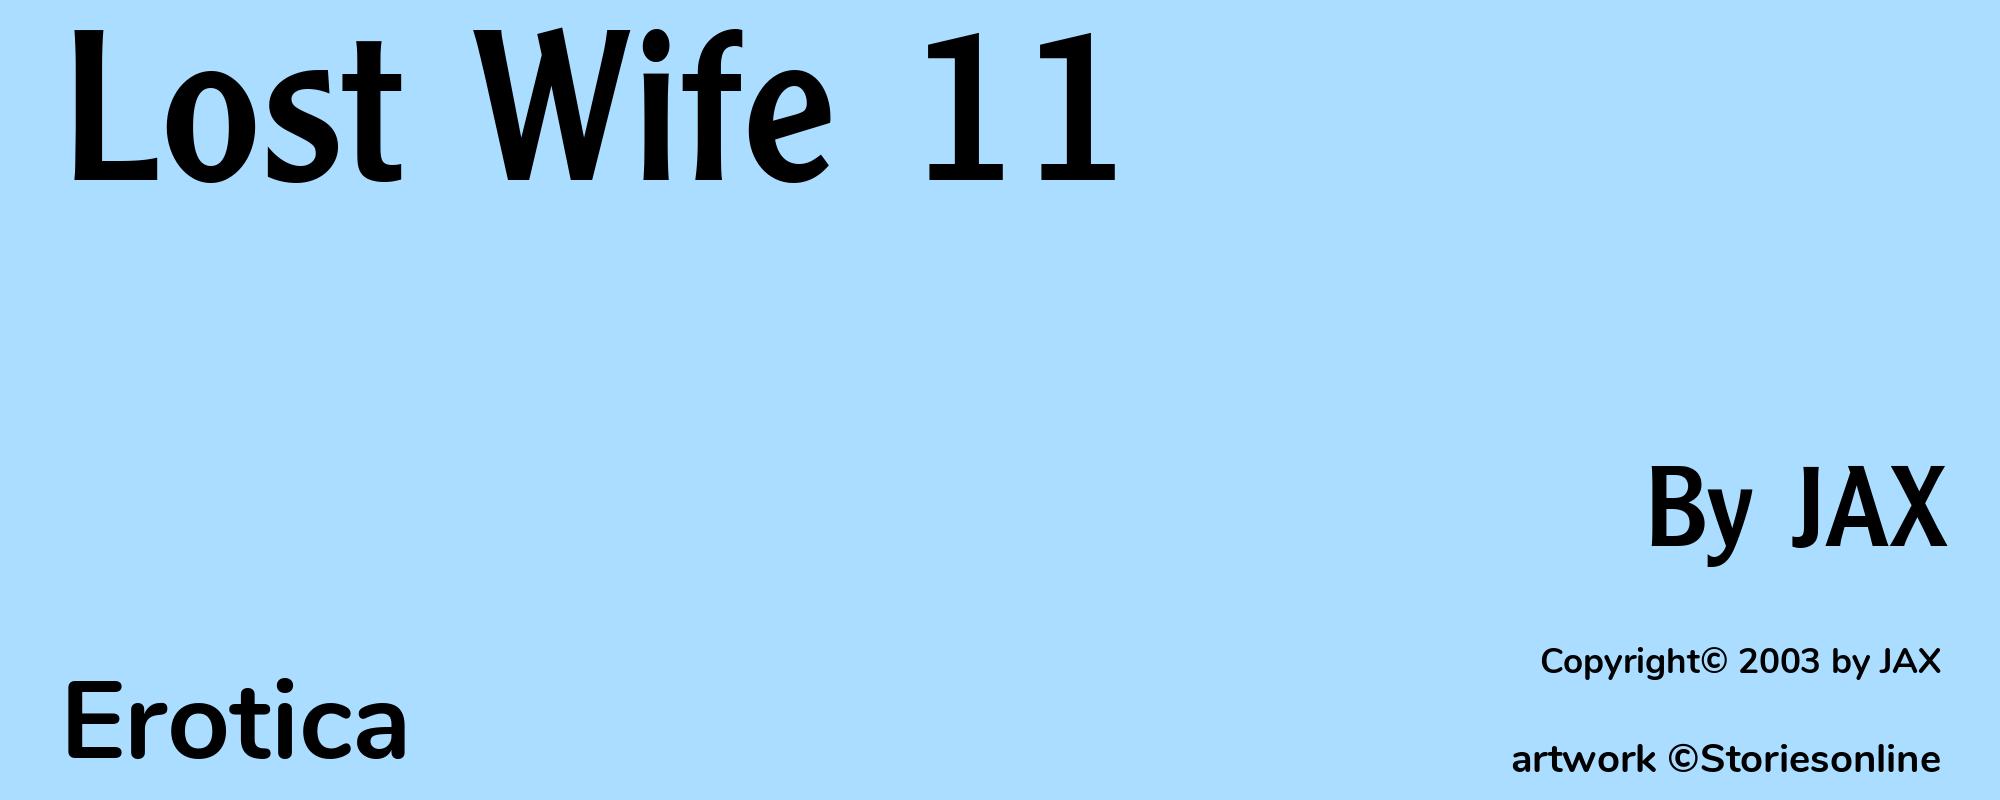 Lost Wife 11 - Cover